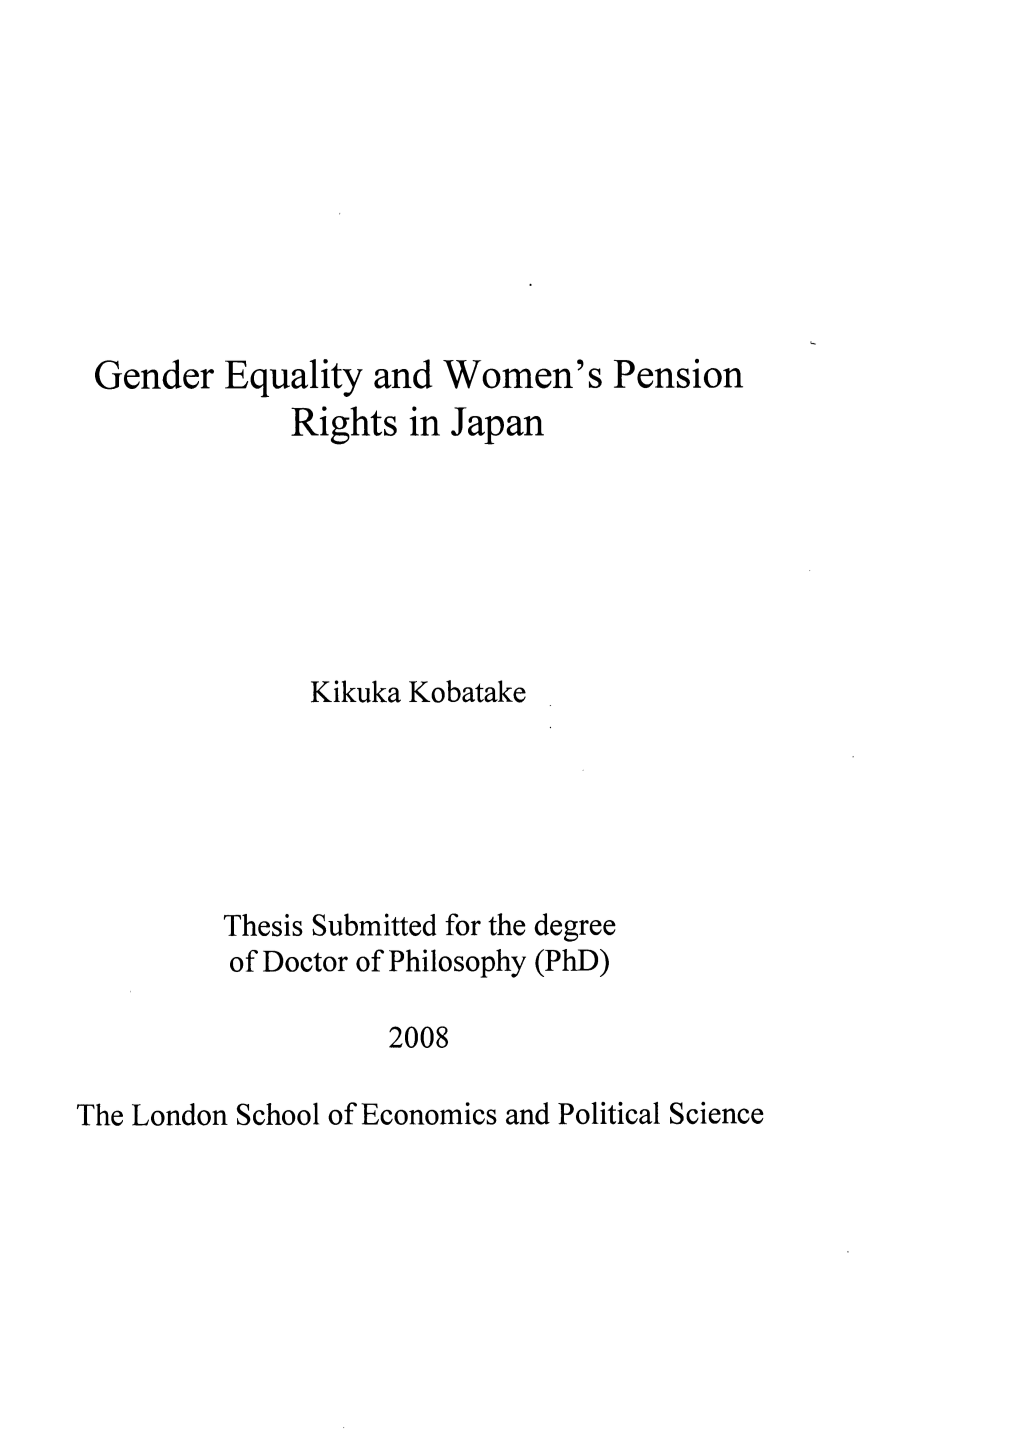 Gender Equality and Women's Pension Rights in Japan